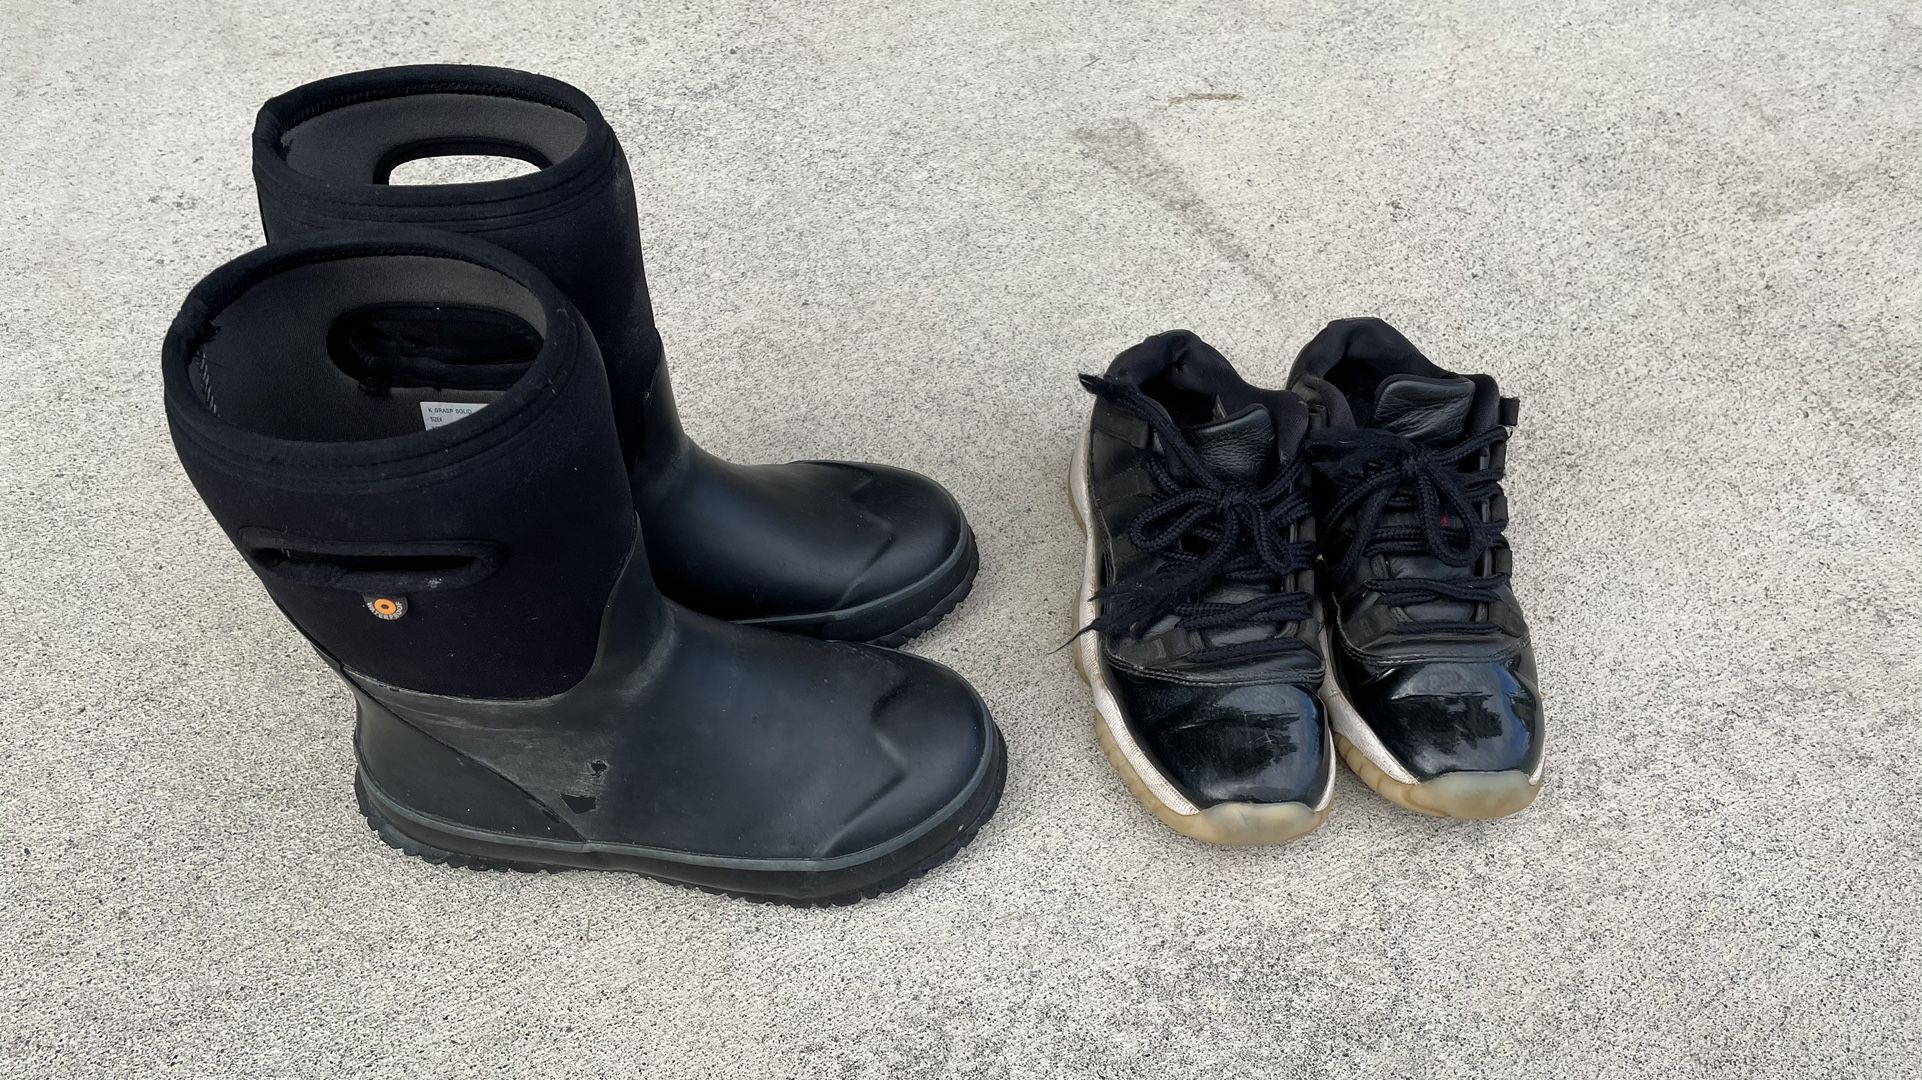 Jordan Boys Shoes And rain/ Winter Boots Used